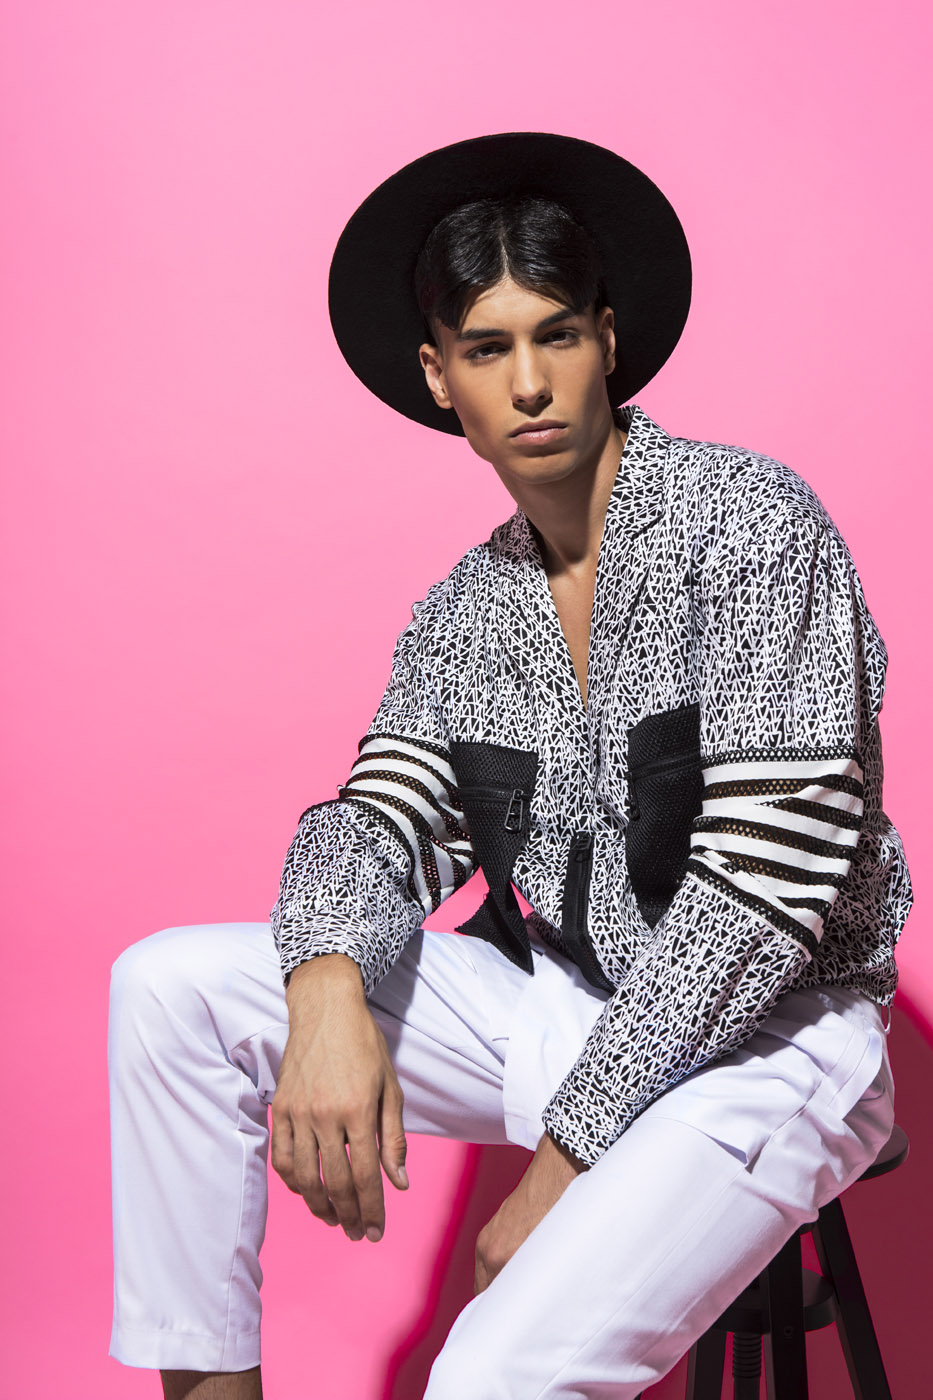 Anton by Phoebe Cheong for CHASSEUR MAGAZINE